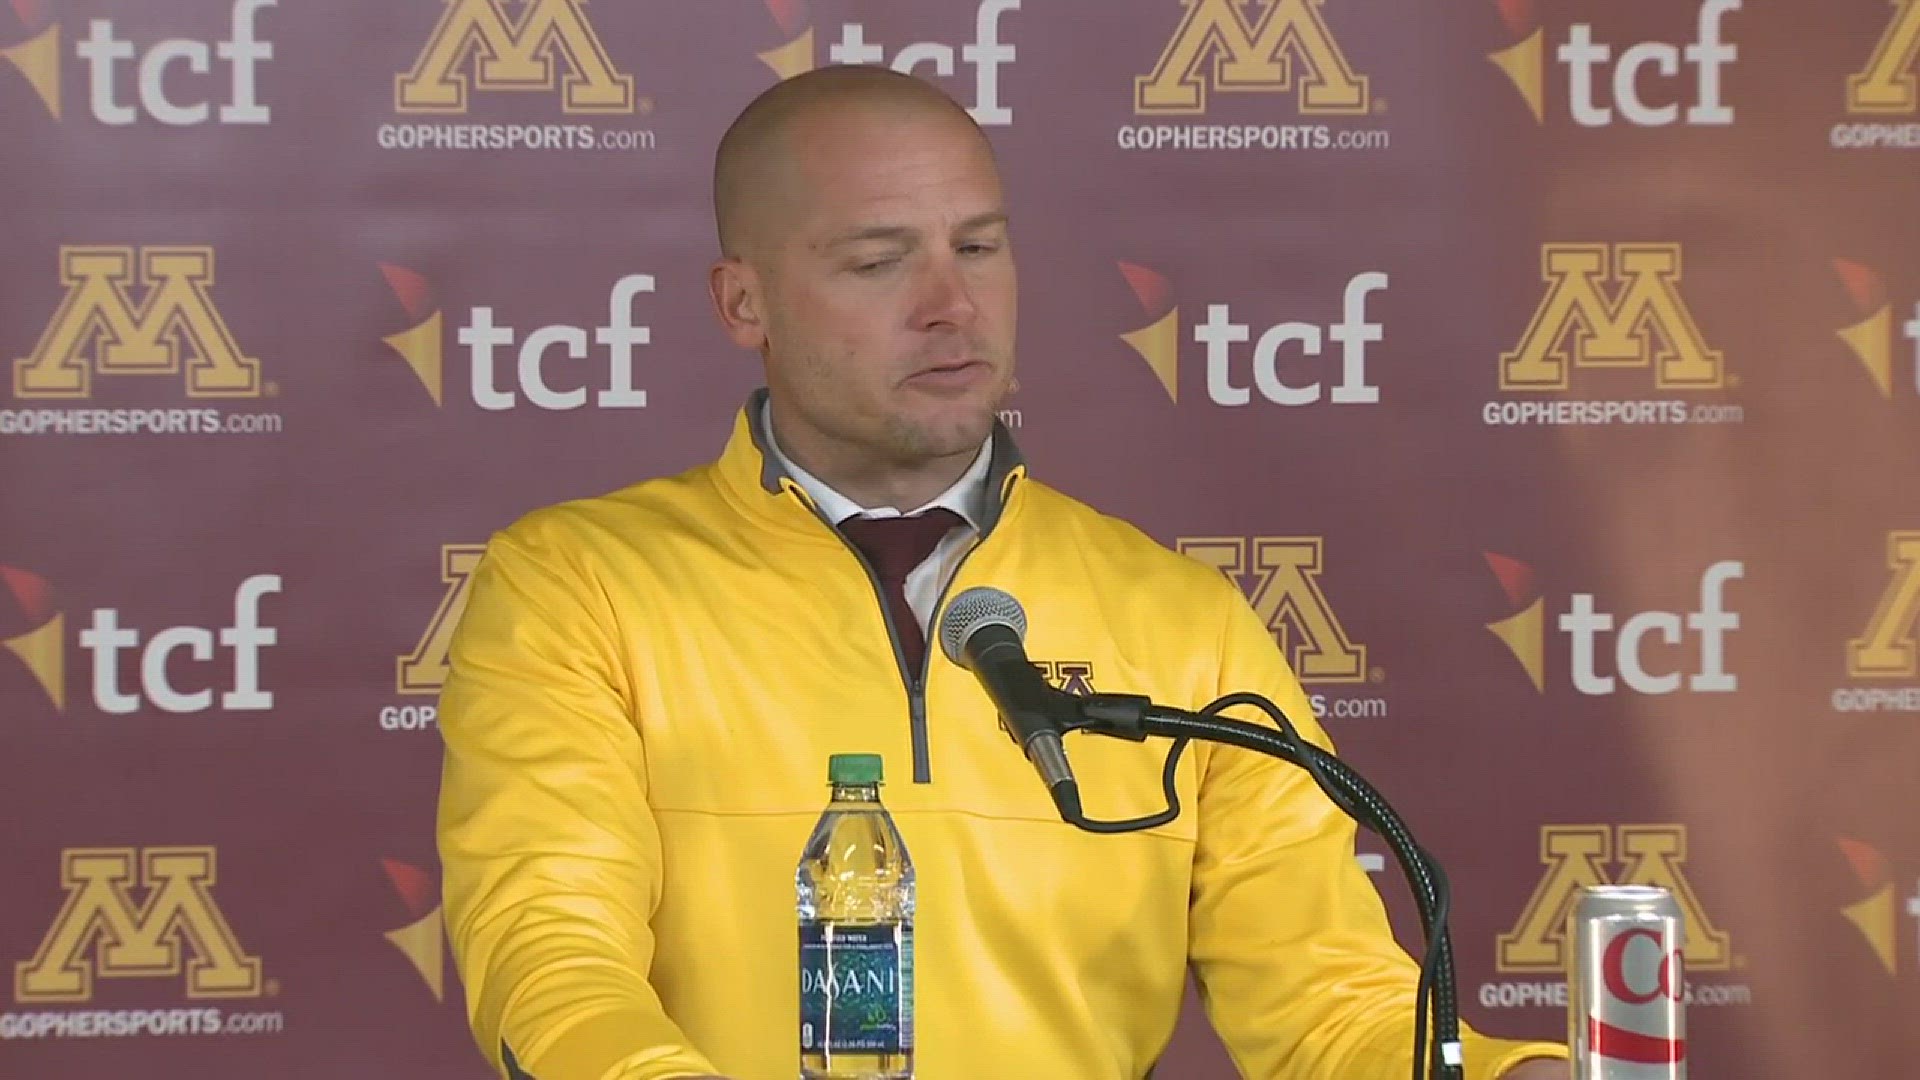 Coach PJ Fleck and Gophers football players react to their disappointing 31-0 loss to the Wisconsin Badgers Saturday afternoon in Minneapolis.